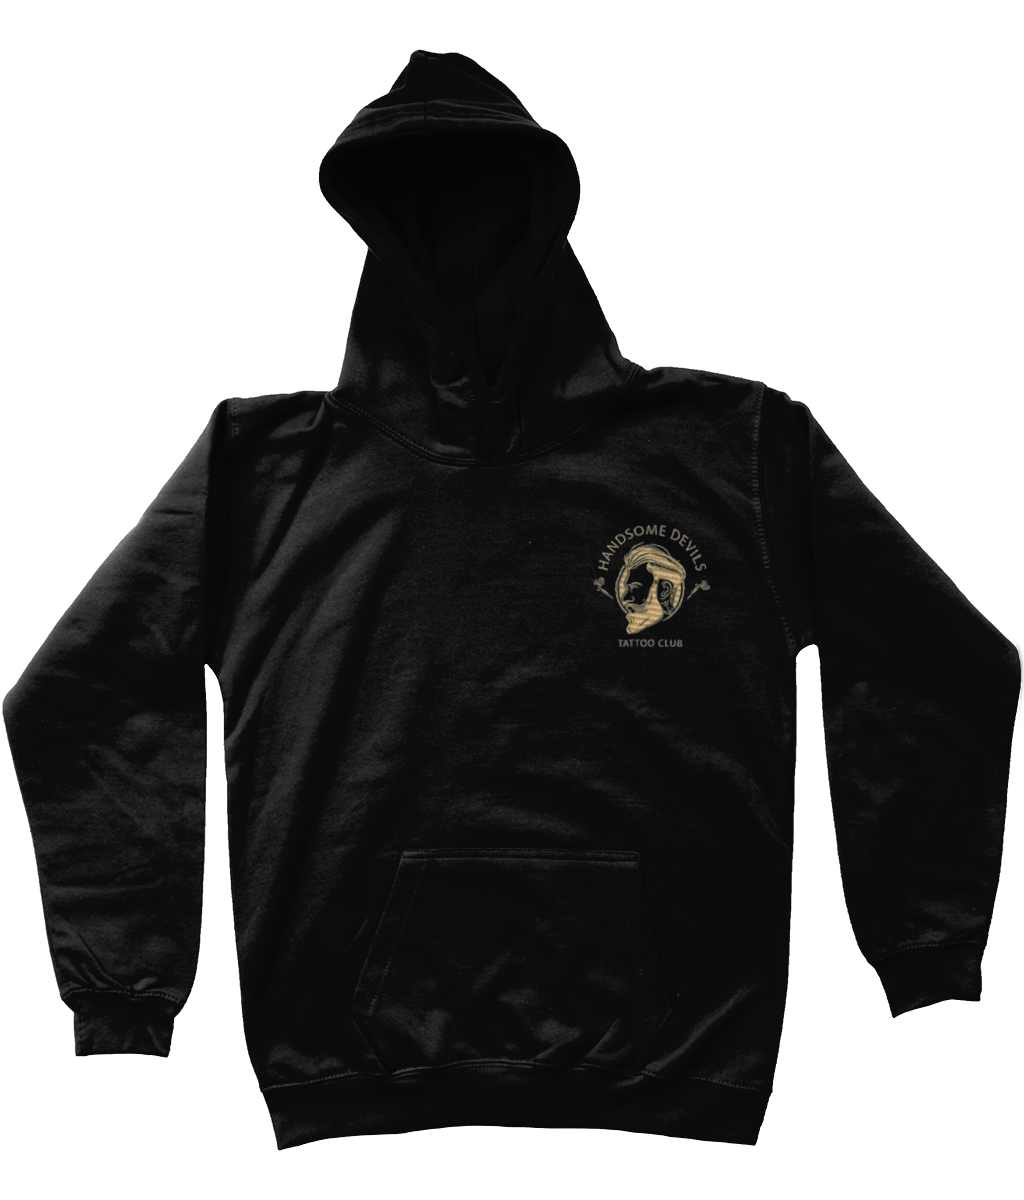 Kids Embroidered Hoodie - Black & Gold